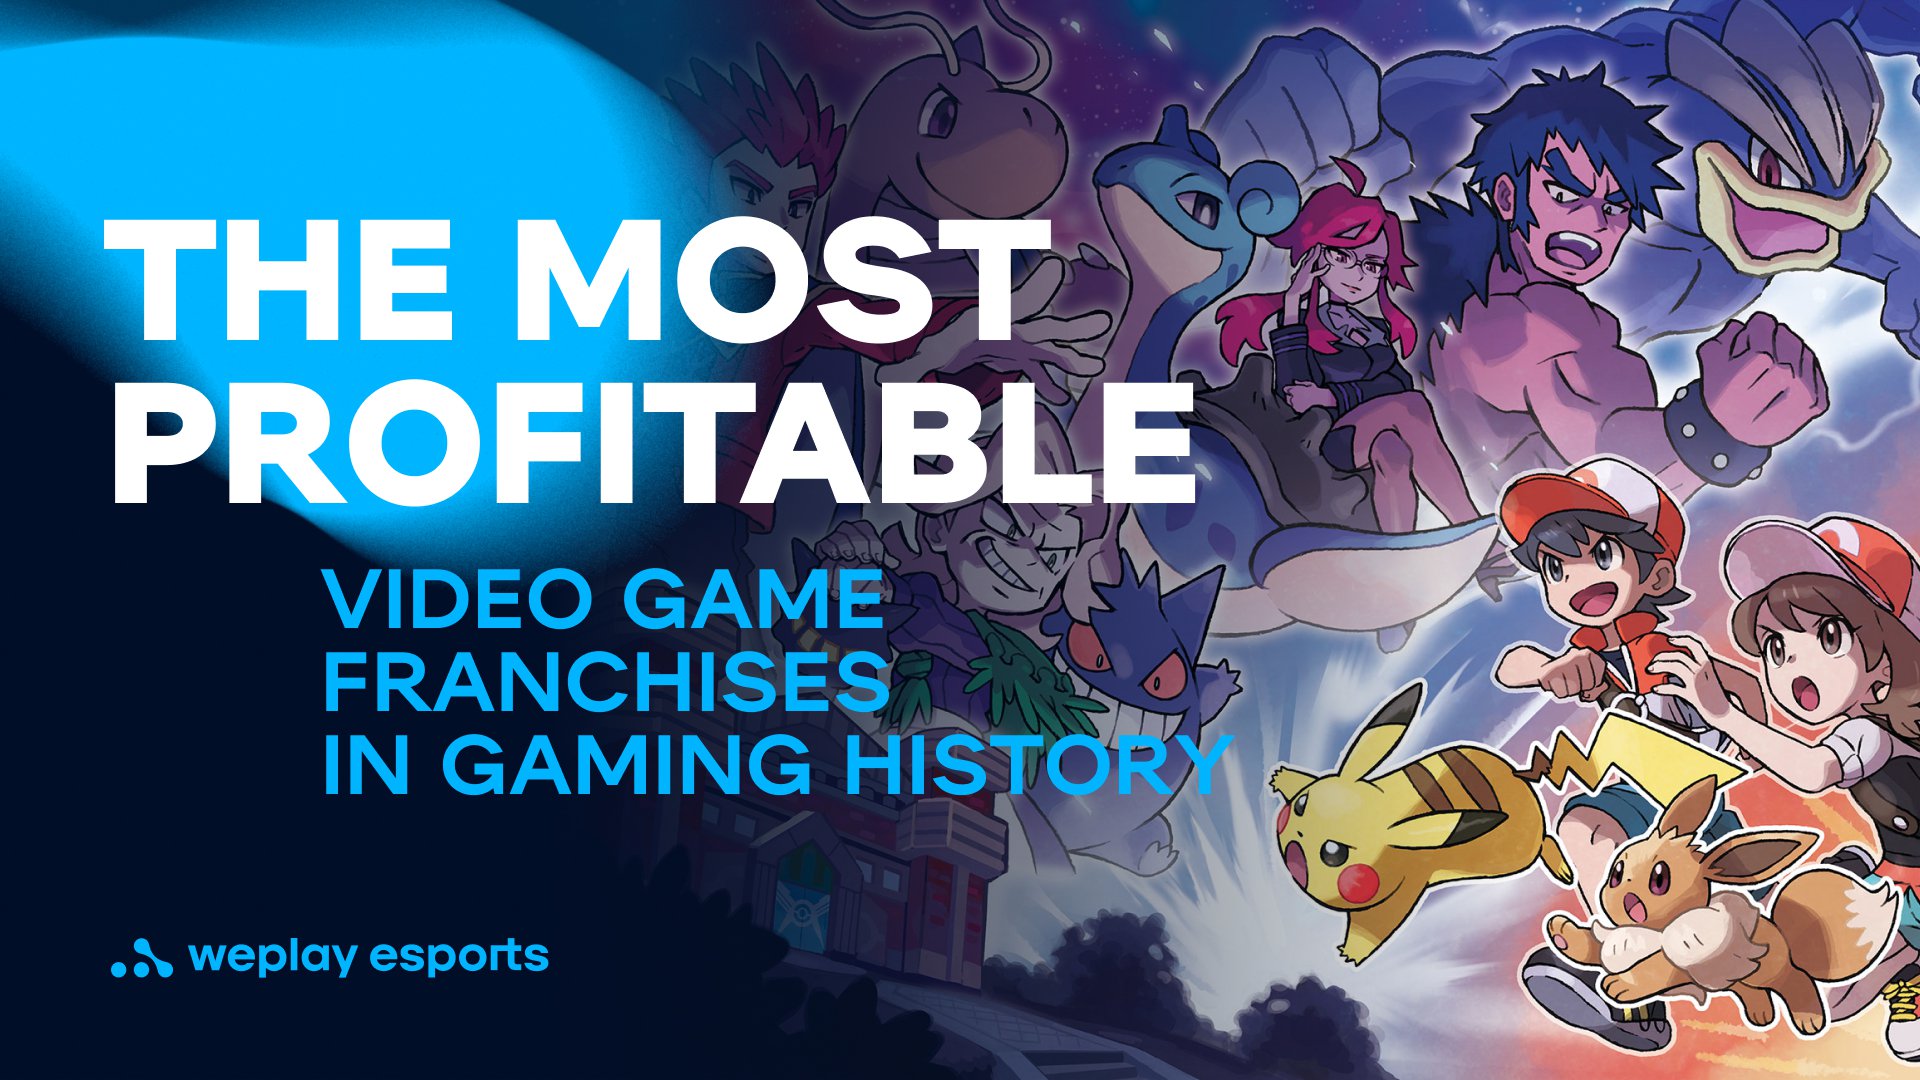 The most profitable video game franchises in gaming history. Credit: WePlay Holding